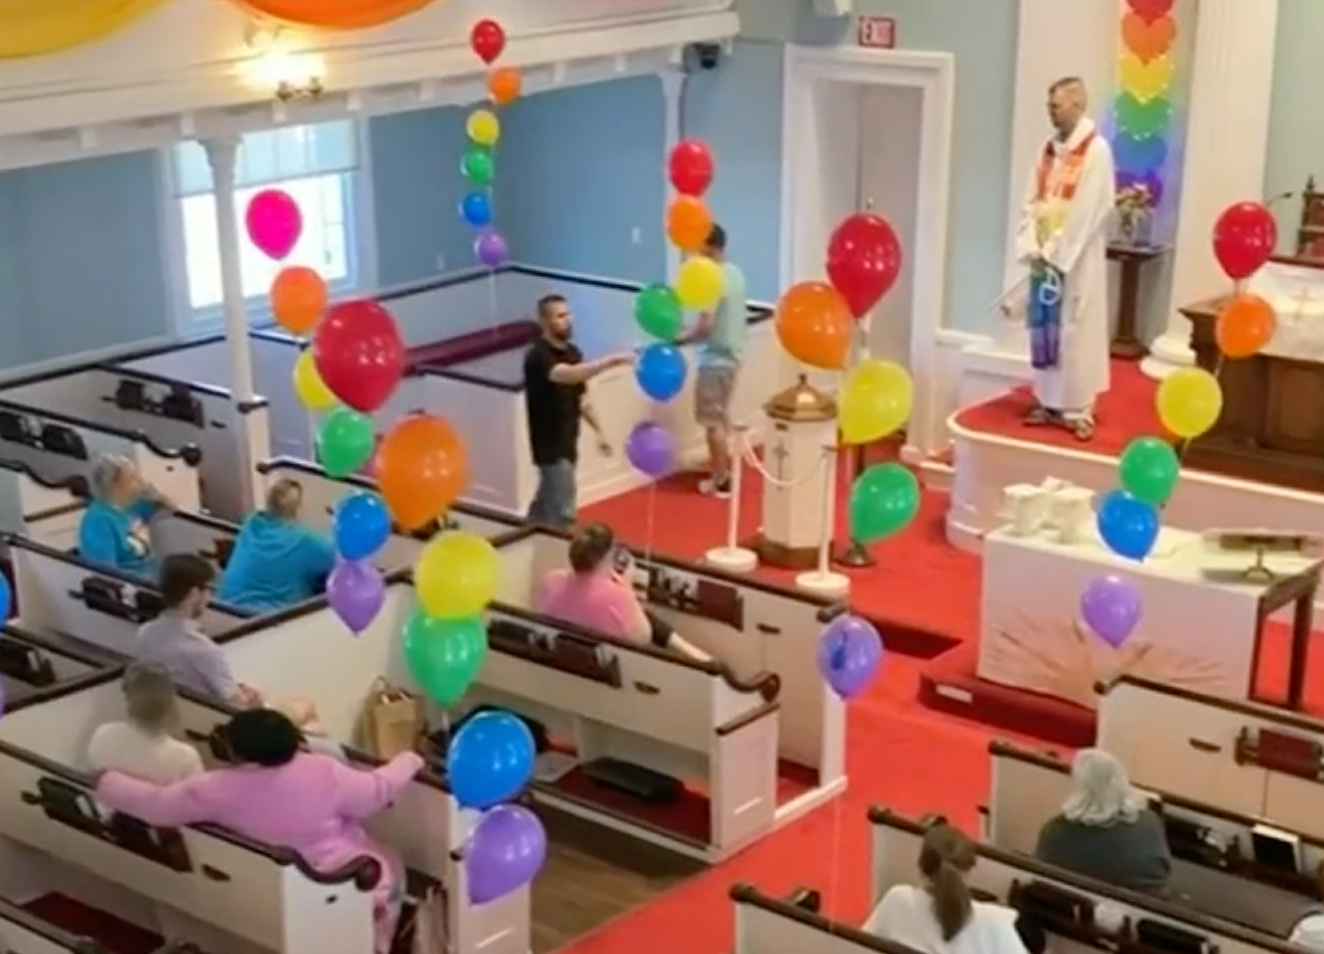 Deranged men shout down pastor trying to deliver Pride church service in possible hate crime